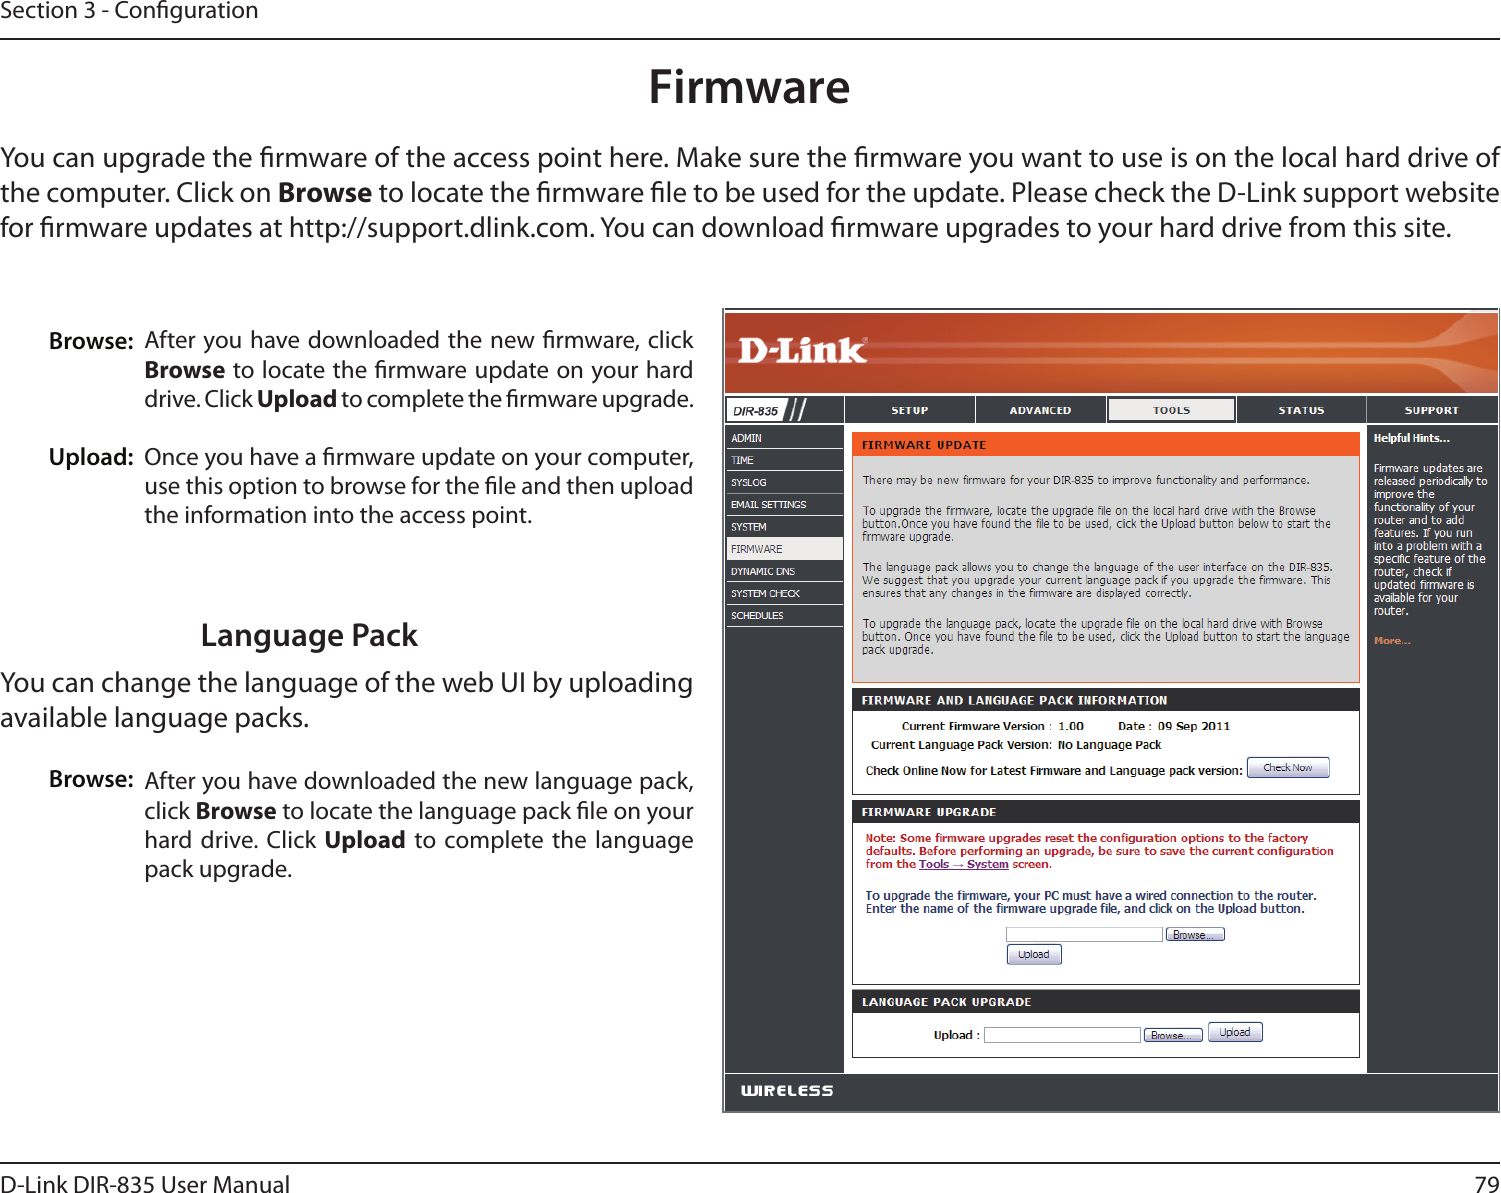 79D-Link DIR-835 User ManualSection 3 - CongurationFirmwareBrowse:Upload:After you have downloaded the new rmware, click Browse to locate the rmware update on your hard drive. Click Upload to complete the rmware upgrade.Once you have a rmware update on your computer, use this option to browse for the le and then upload the information into the access point. You can upgrade the rmware of the access point here. Make sure the rmware you want to use is on the local hard drive of the computer. Click on Browse to locate the rmware le to be used for the update. Please check the D-Link support website for rmware updates at http://support.dlink.com. You can download rmware upgrades to your hard drive from this site.After you have downloaded the new language pack, click Browse to locate the language pack le on your hard drive. Click  Upload  to complete the  language pack upgrade.Language PackYou can change the language of the web UI by uploading available language packs.Browse: